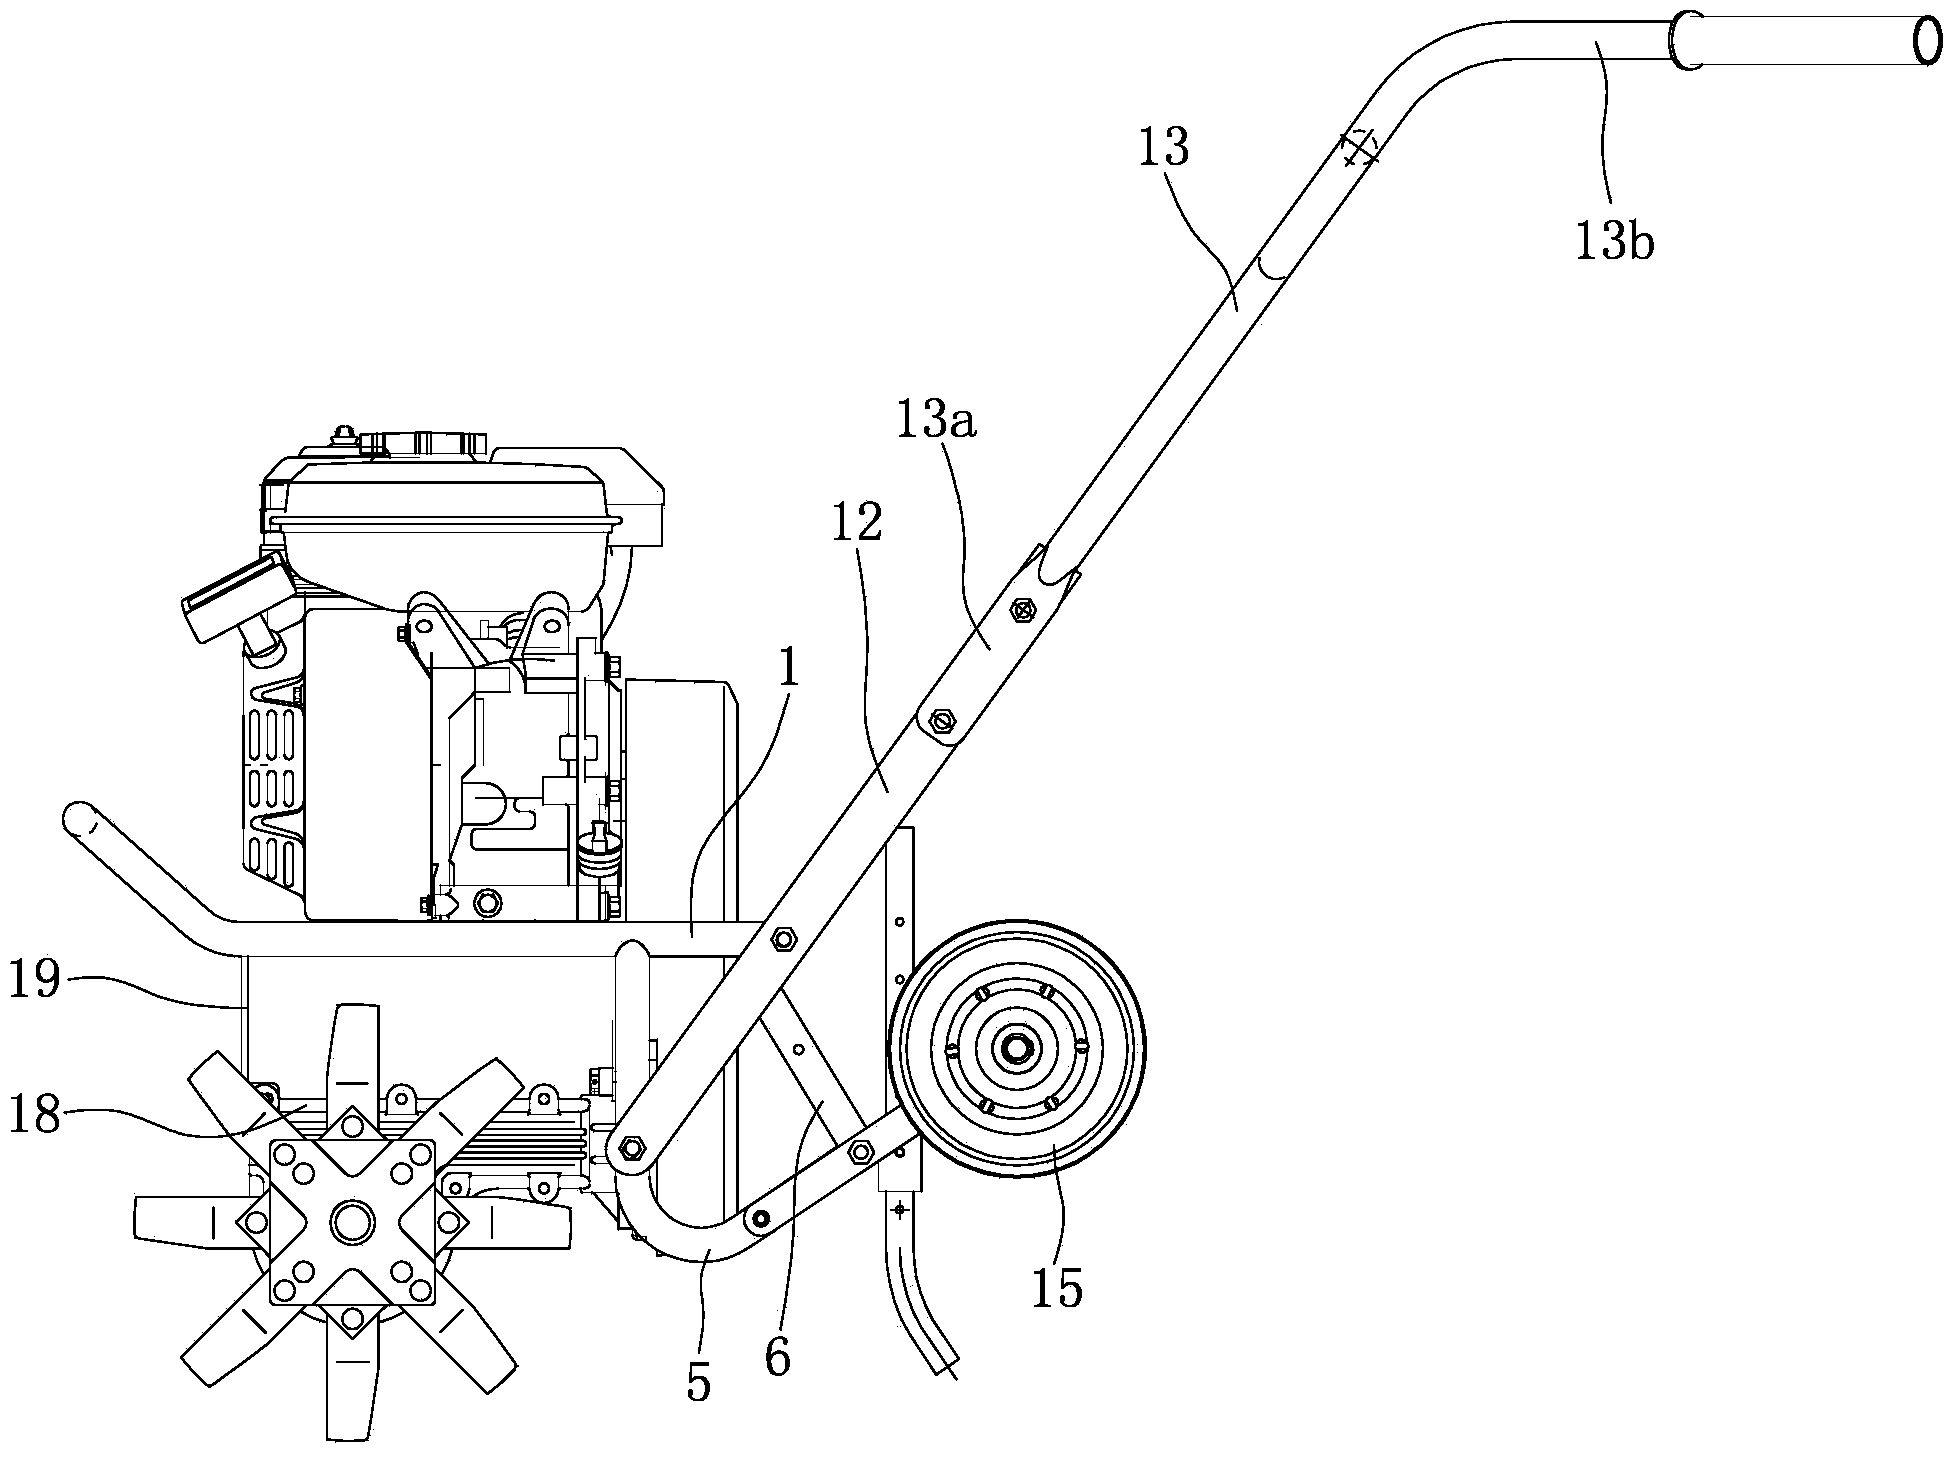 Arrangement structure for handgrip seat, rear wheel assembly and transmission case of portable micro ploughing machine